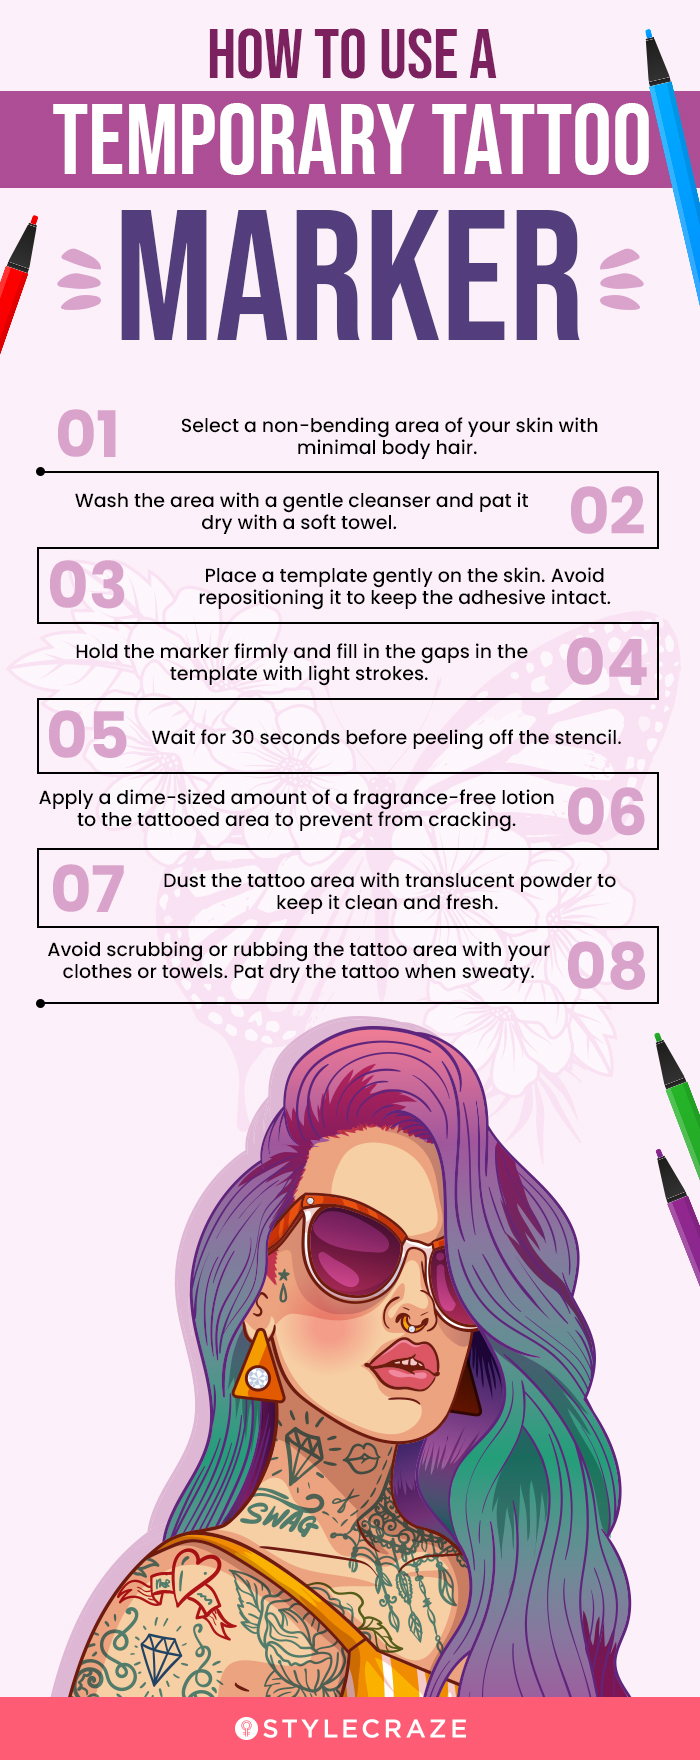 How To Use A Temporary Tattoo Marker (infographic)